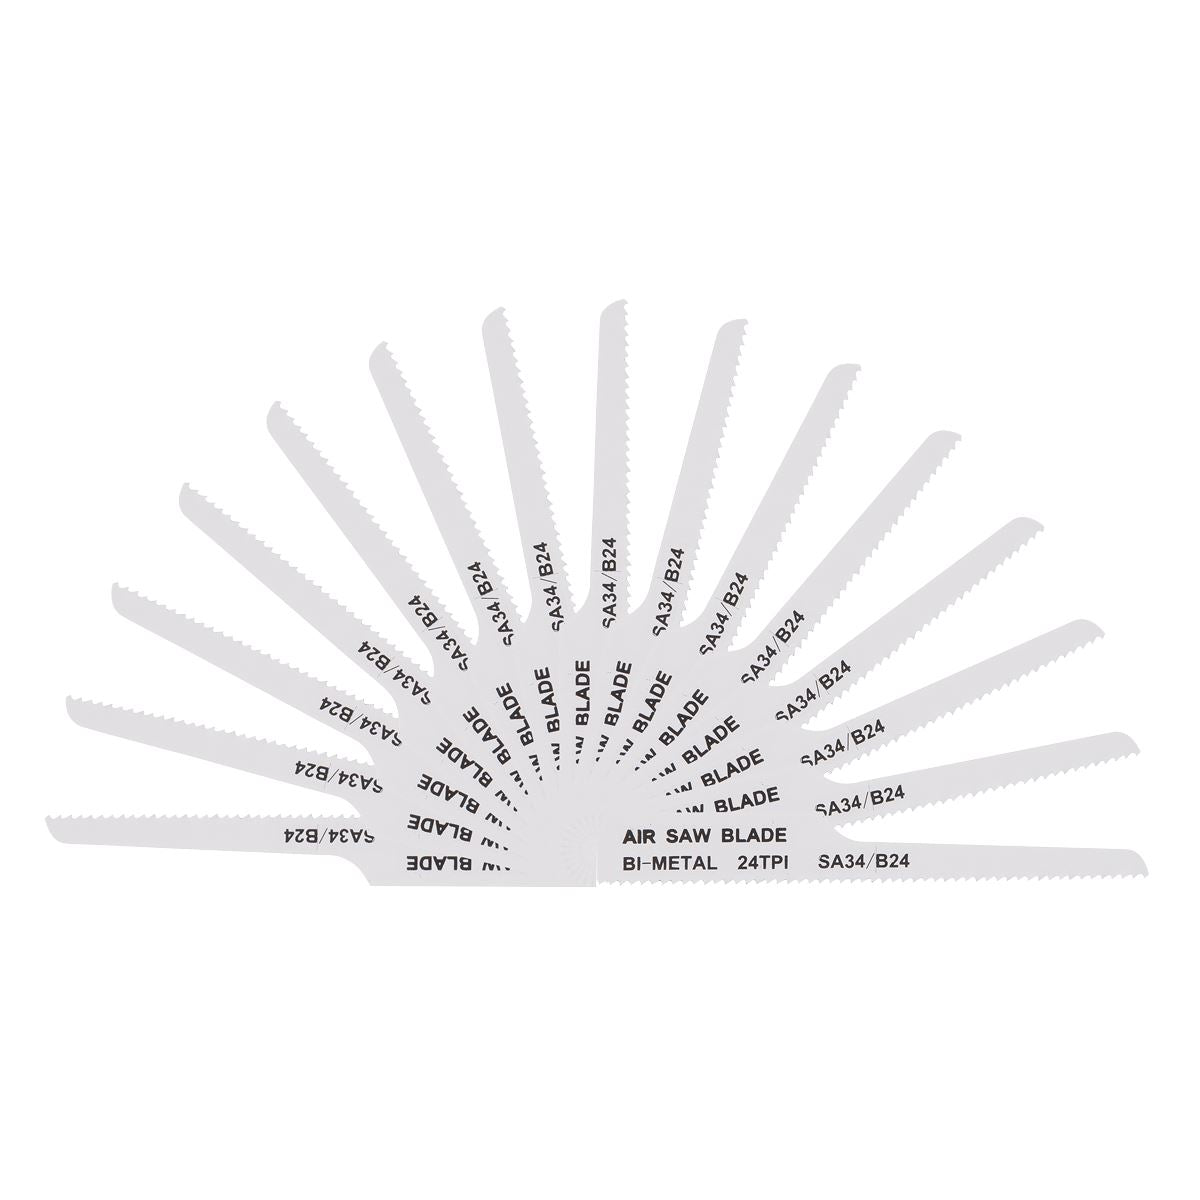 Sealey Air Saw Blade 24tpi - Pack of 15